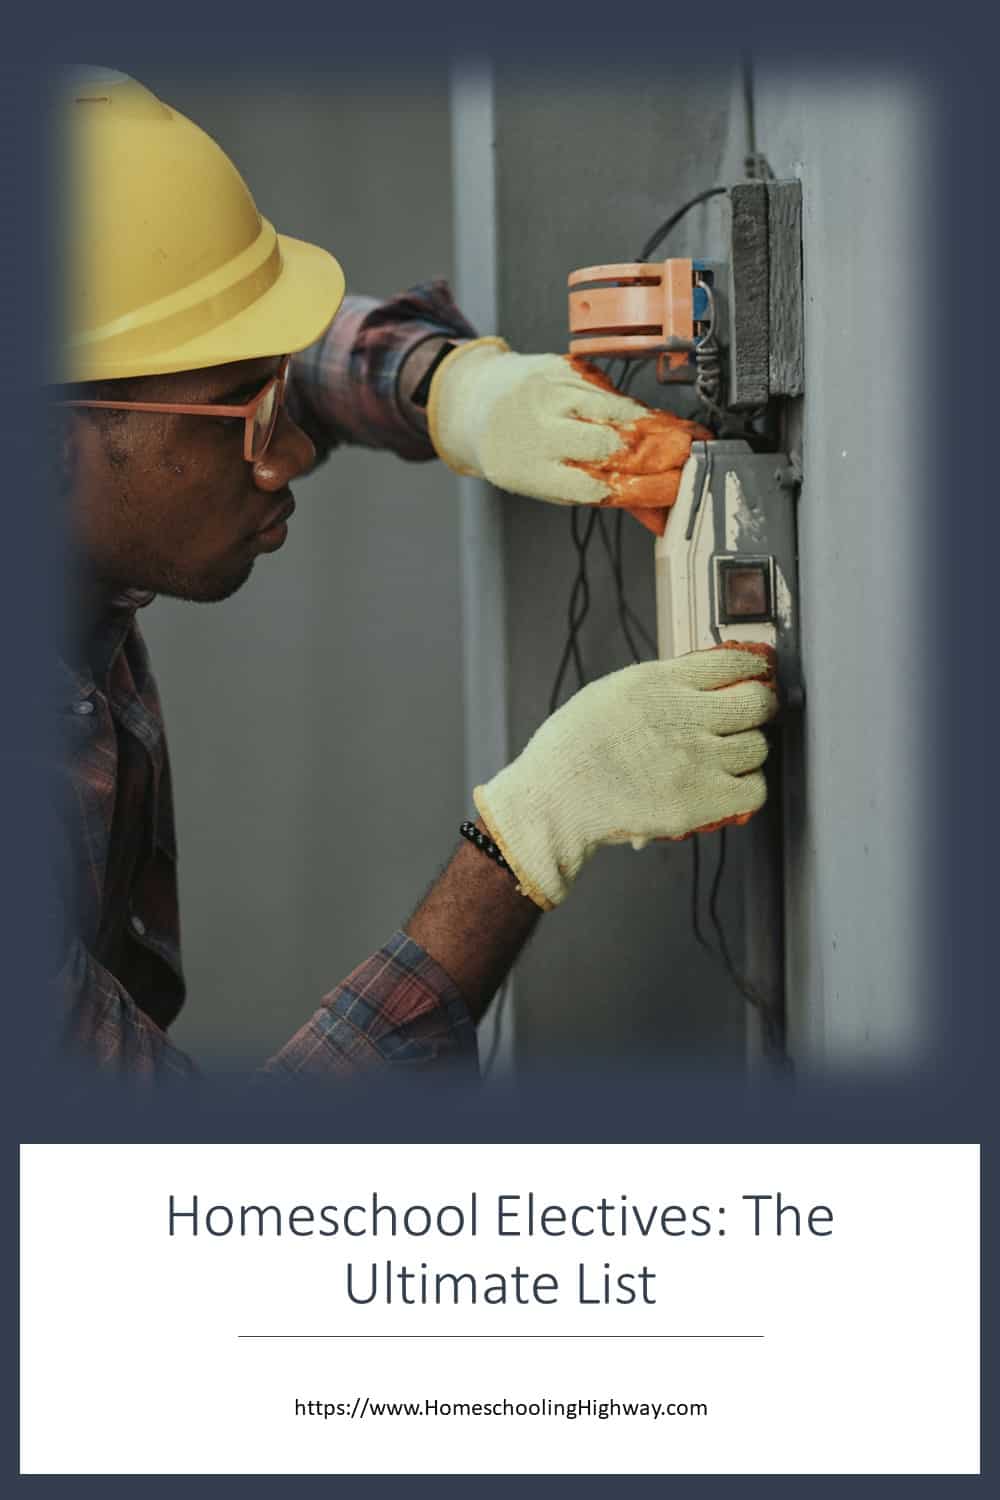 The Ultimate List of Homeschooling Electives. From Homeschooling Highway. This picture is of a boy with a hardhat doing some work.